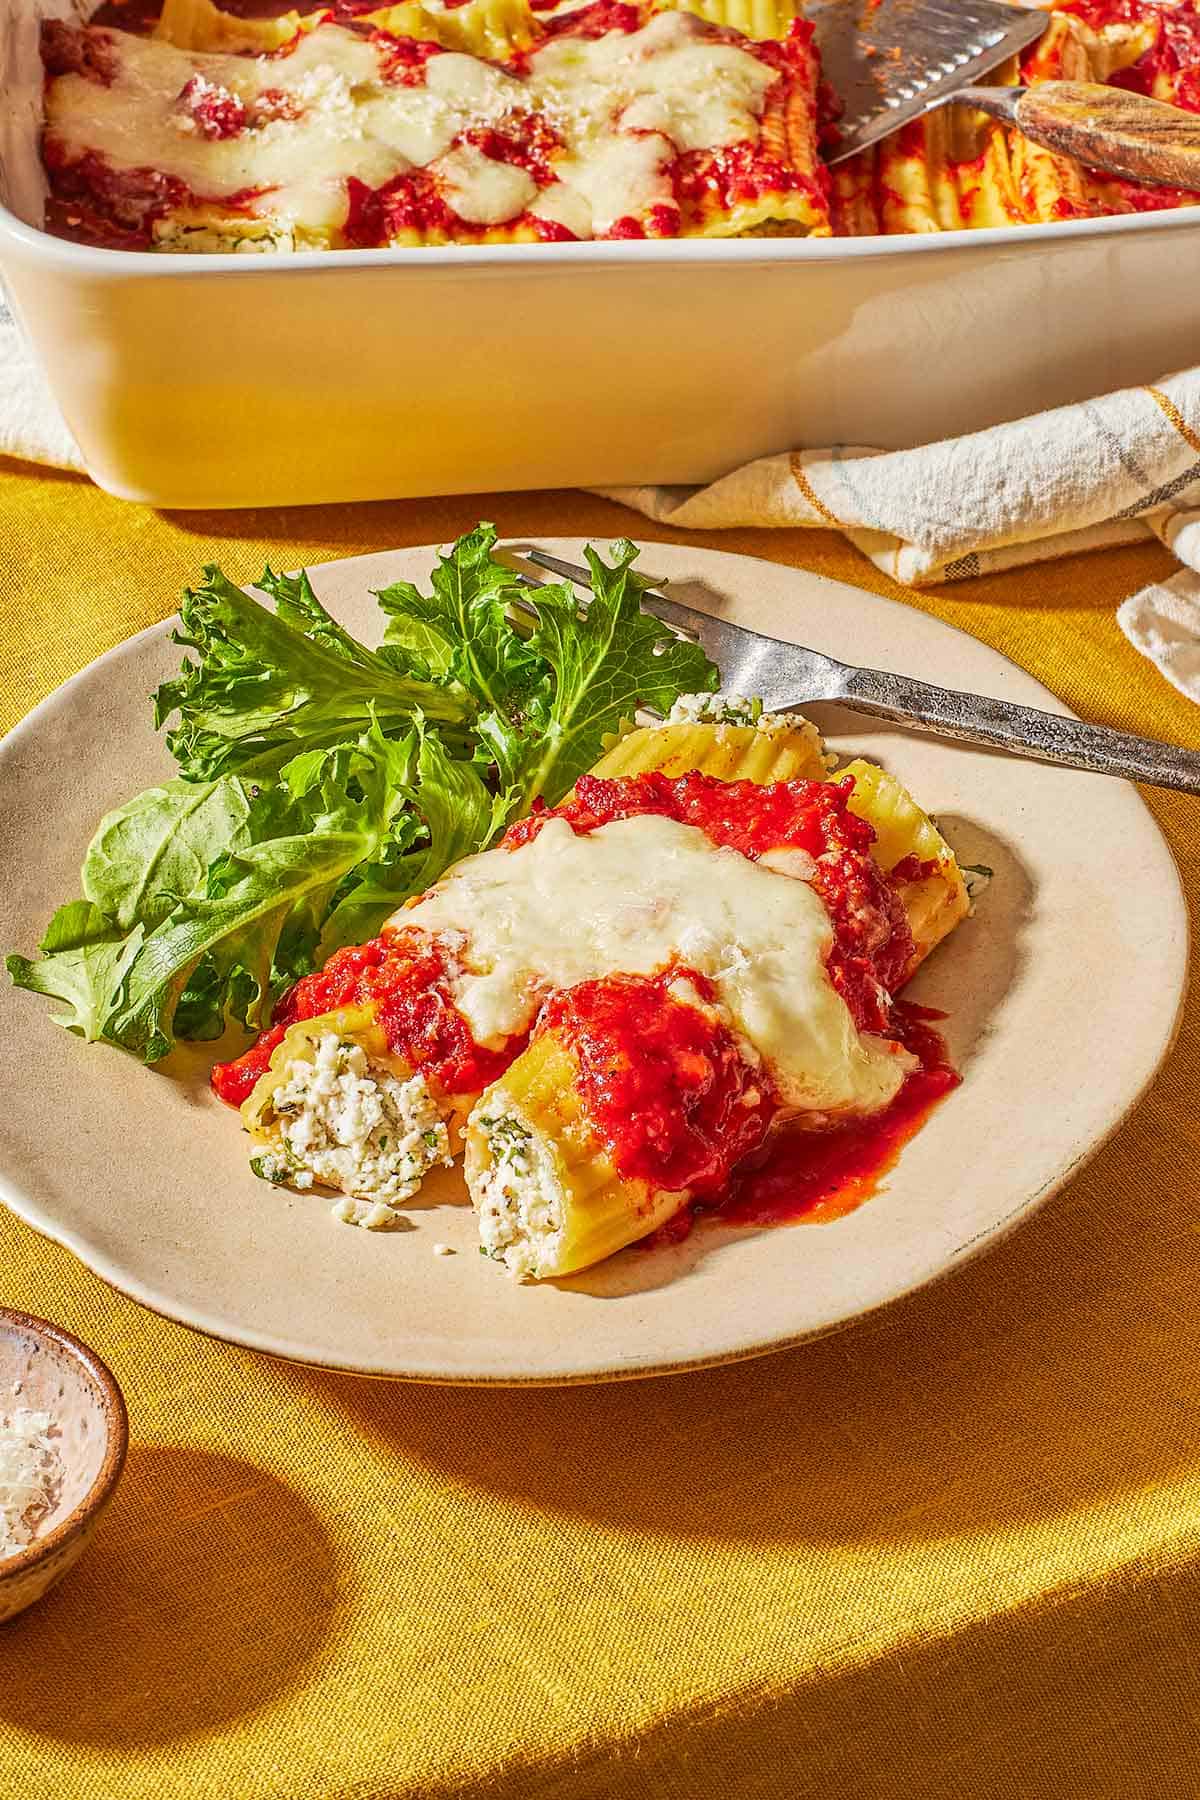 2 pieces of baked manicotti topped with spaghetti sauce and mozzarella cheese on a plate with a salad and a fork in front of a baking dish with the rest of the manicotti.